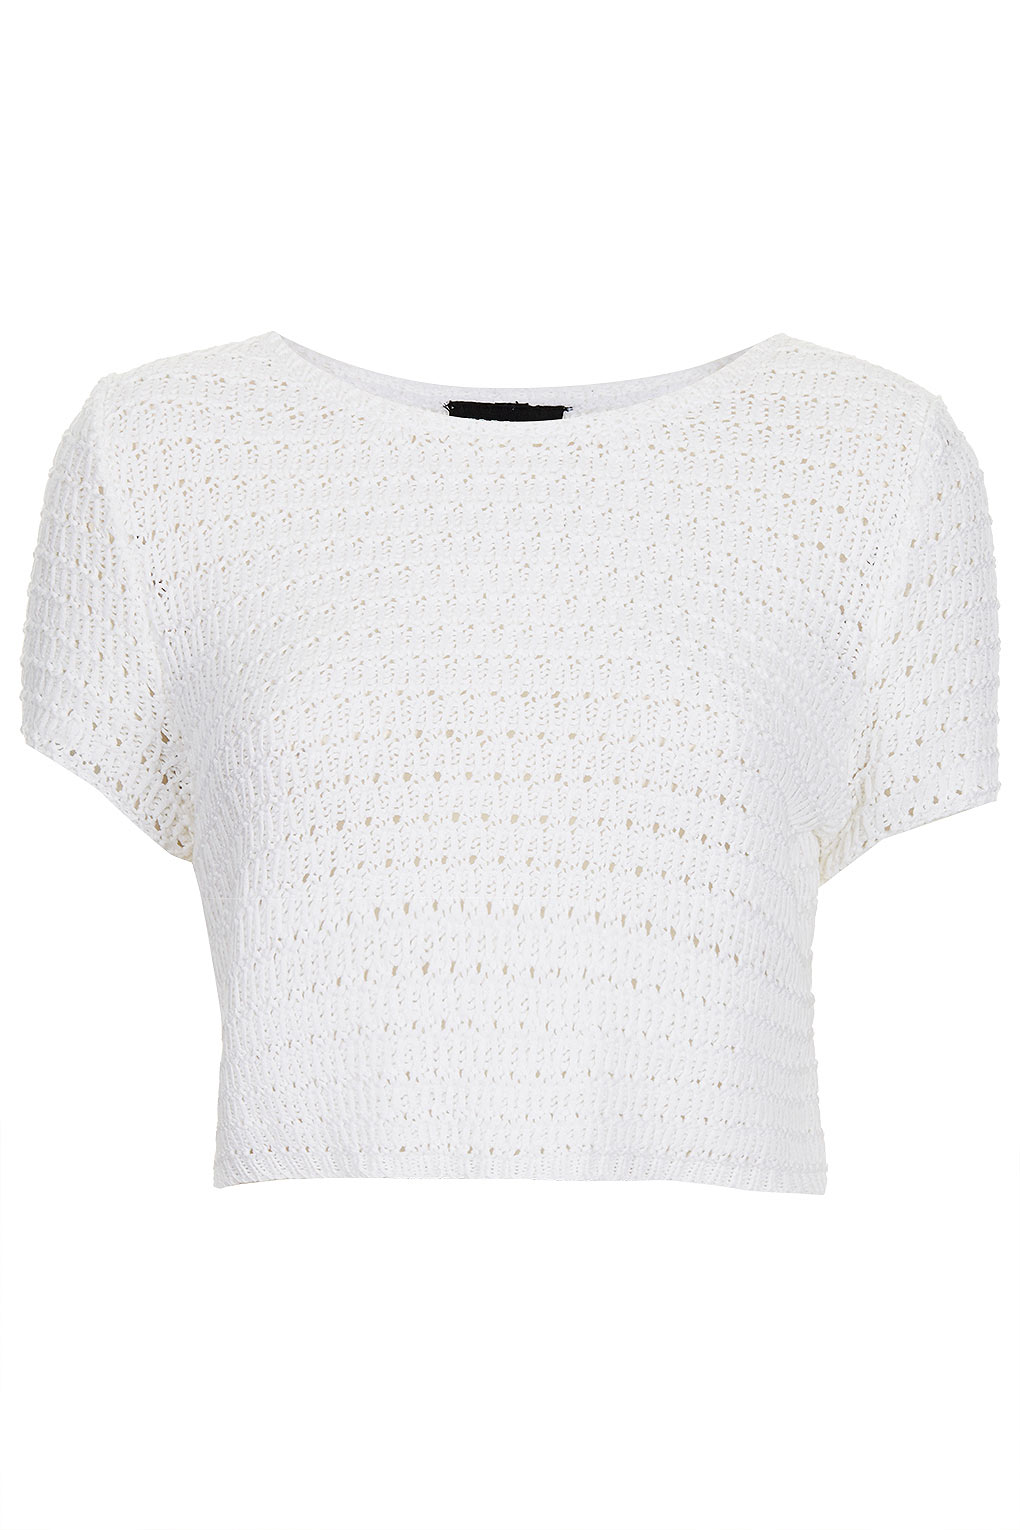 Topshop Knitted Crochet Crop Top in White | Lyst